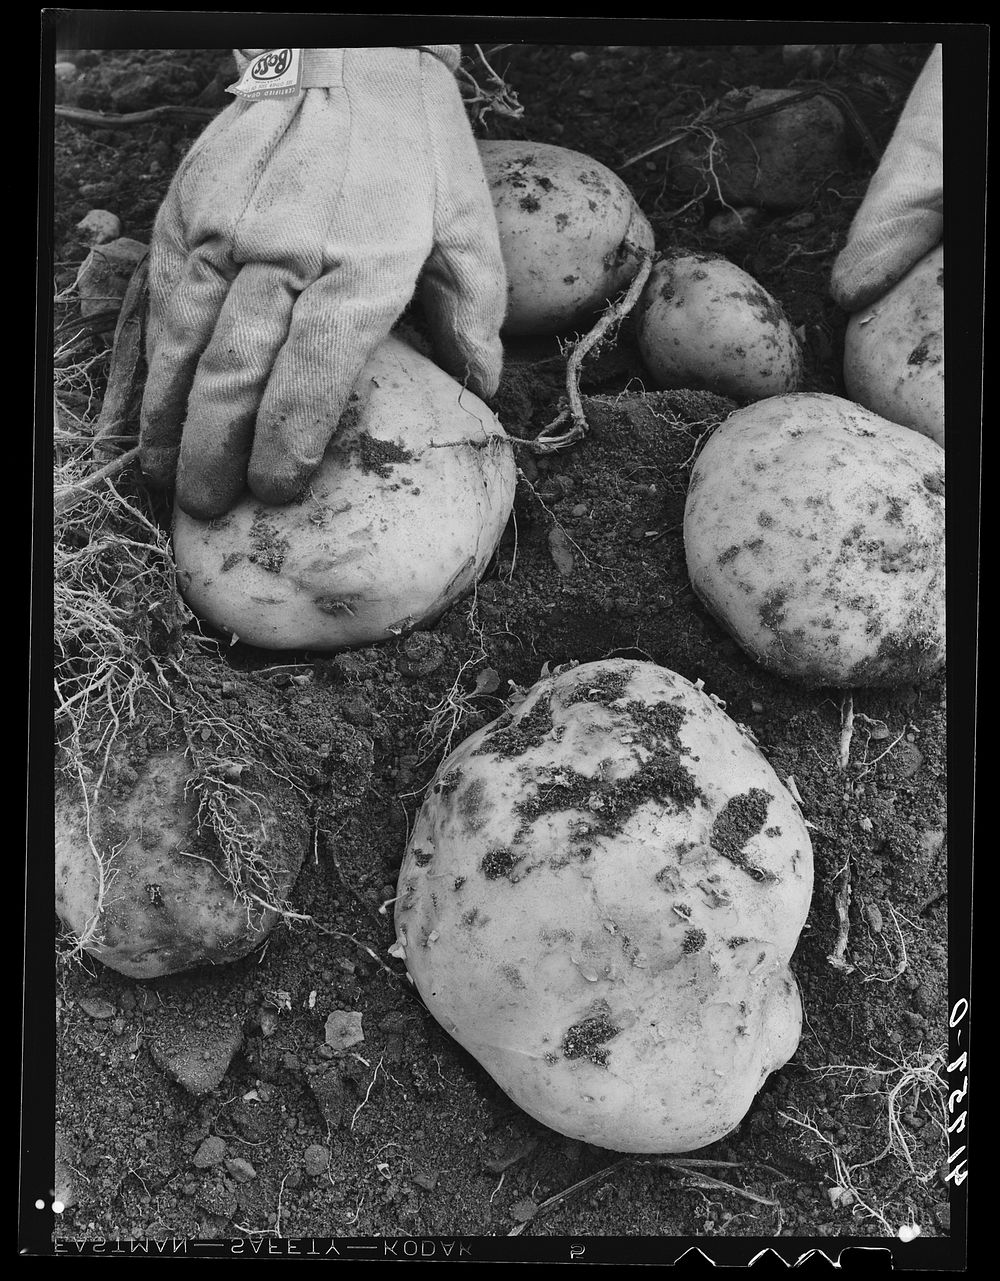 [Untitled photo, possibly related to: Aroostook potatoes of the Katahdin variety on one of the farms of the Woodman Potato…